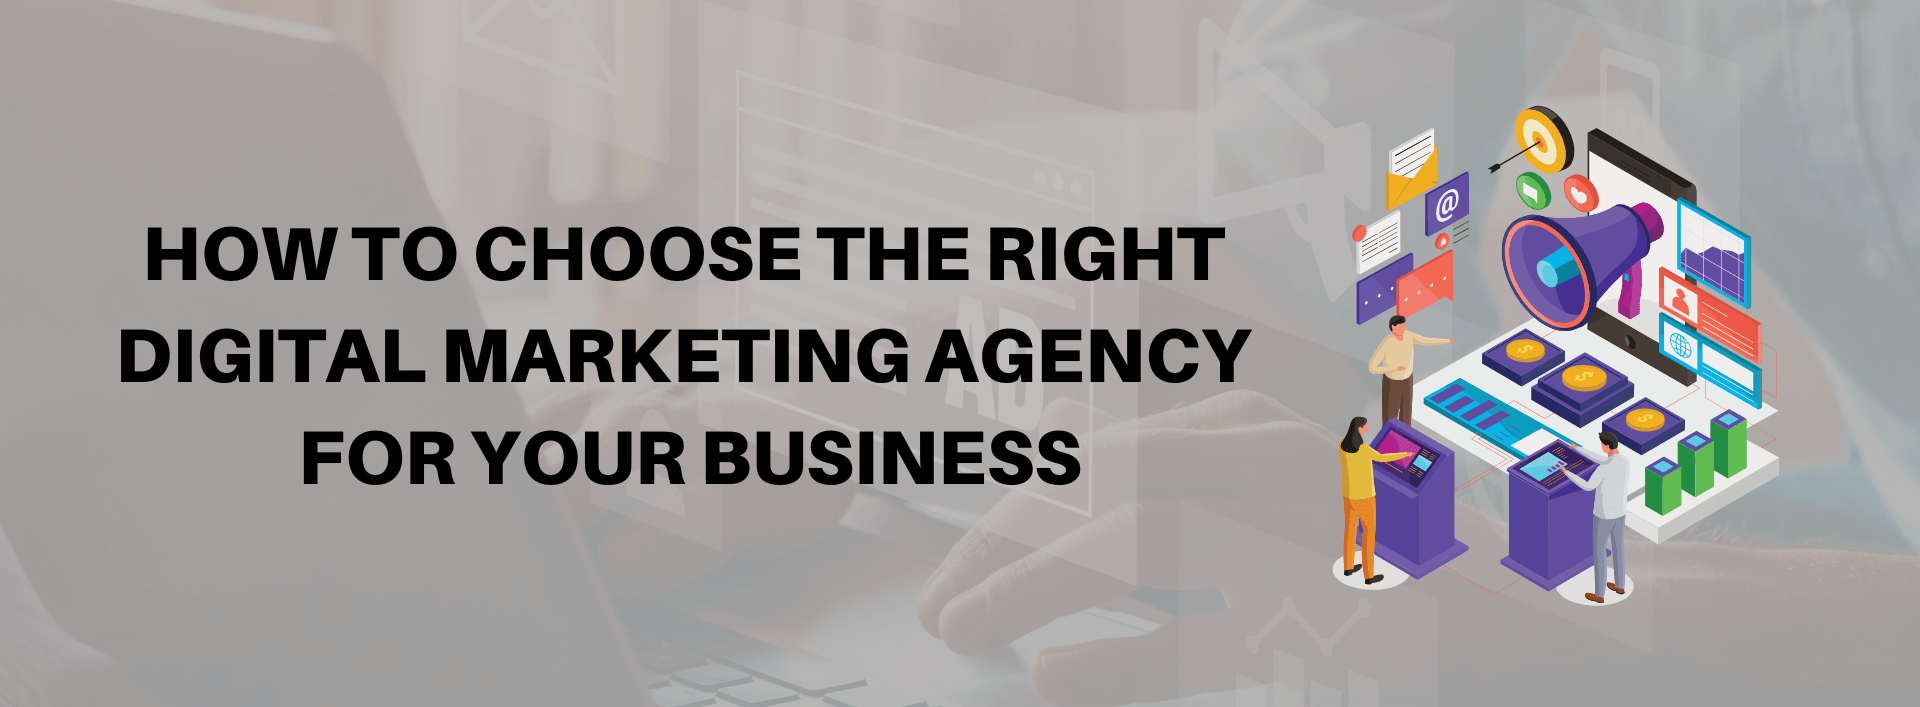 How to choose the right Digital Marketing Agency for your business